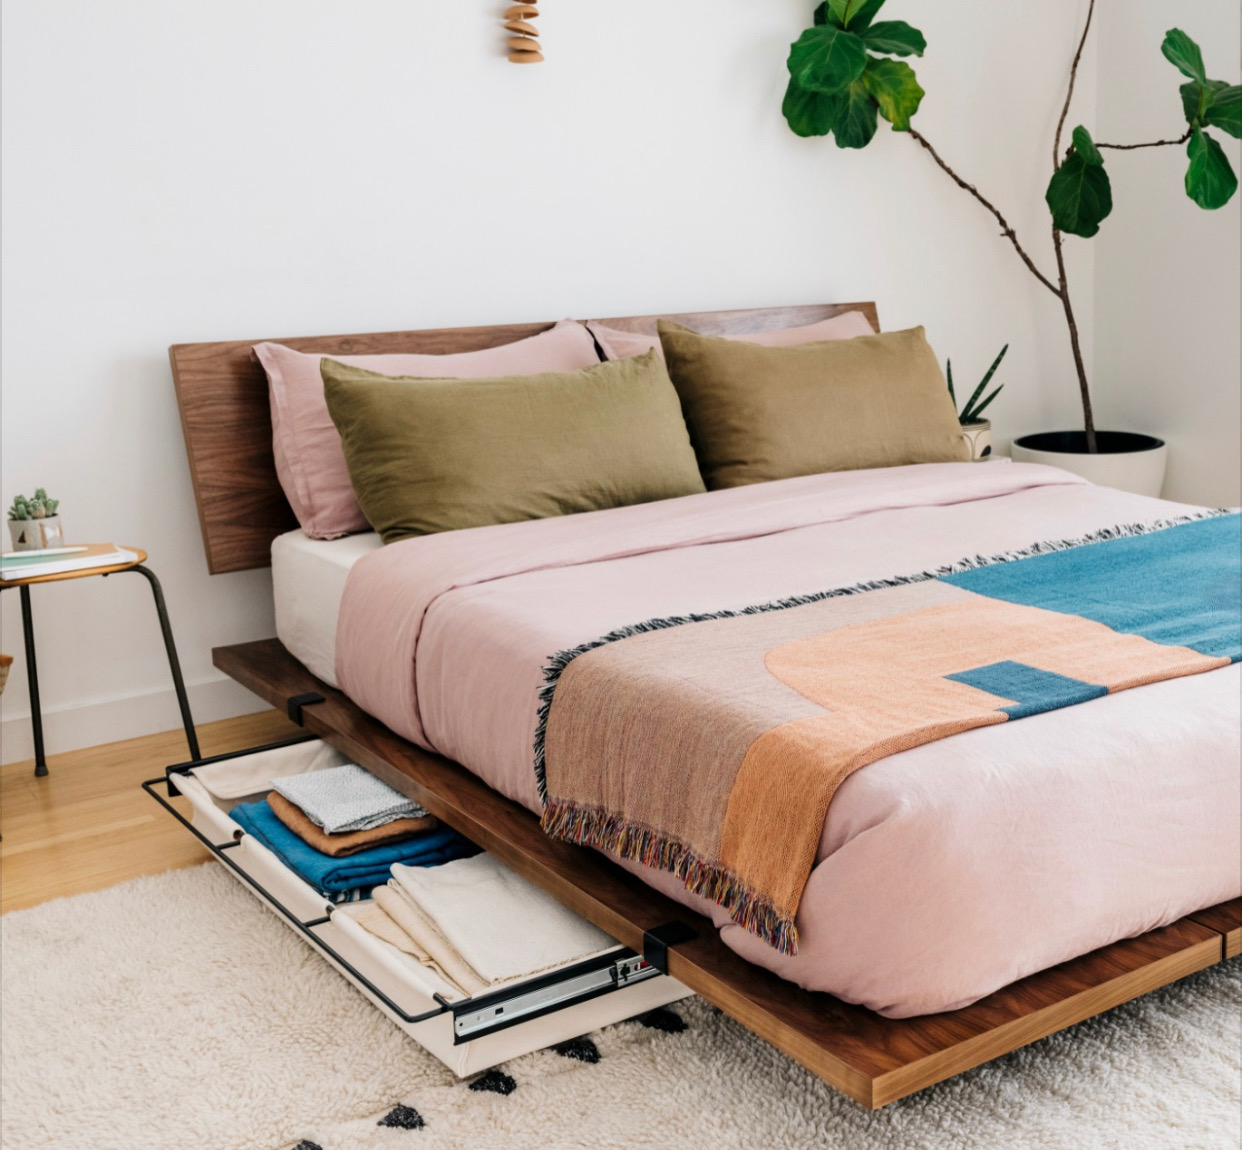 Low Profile Platform Bed Frames, Beds That Sit Low To The Ground